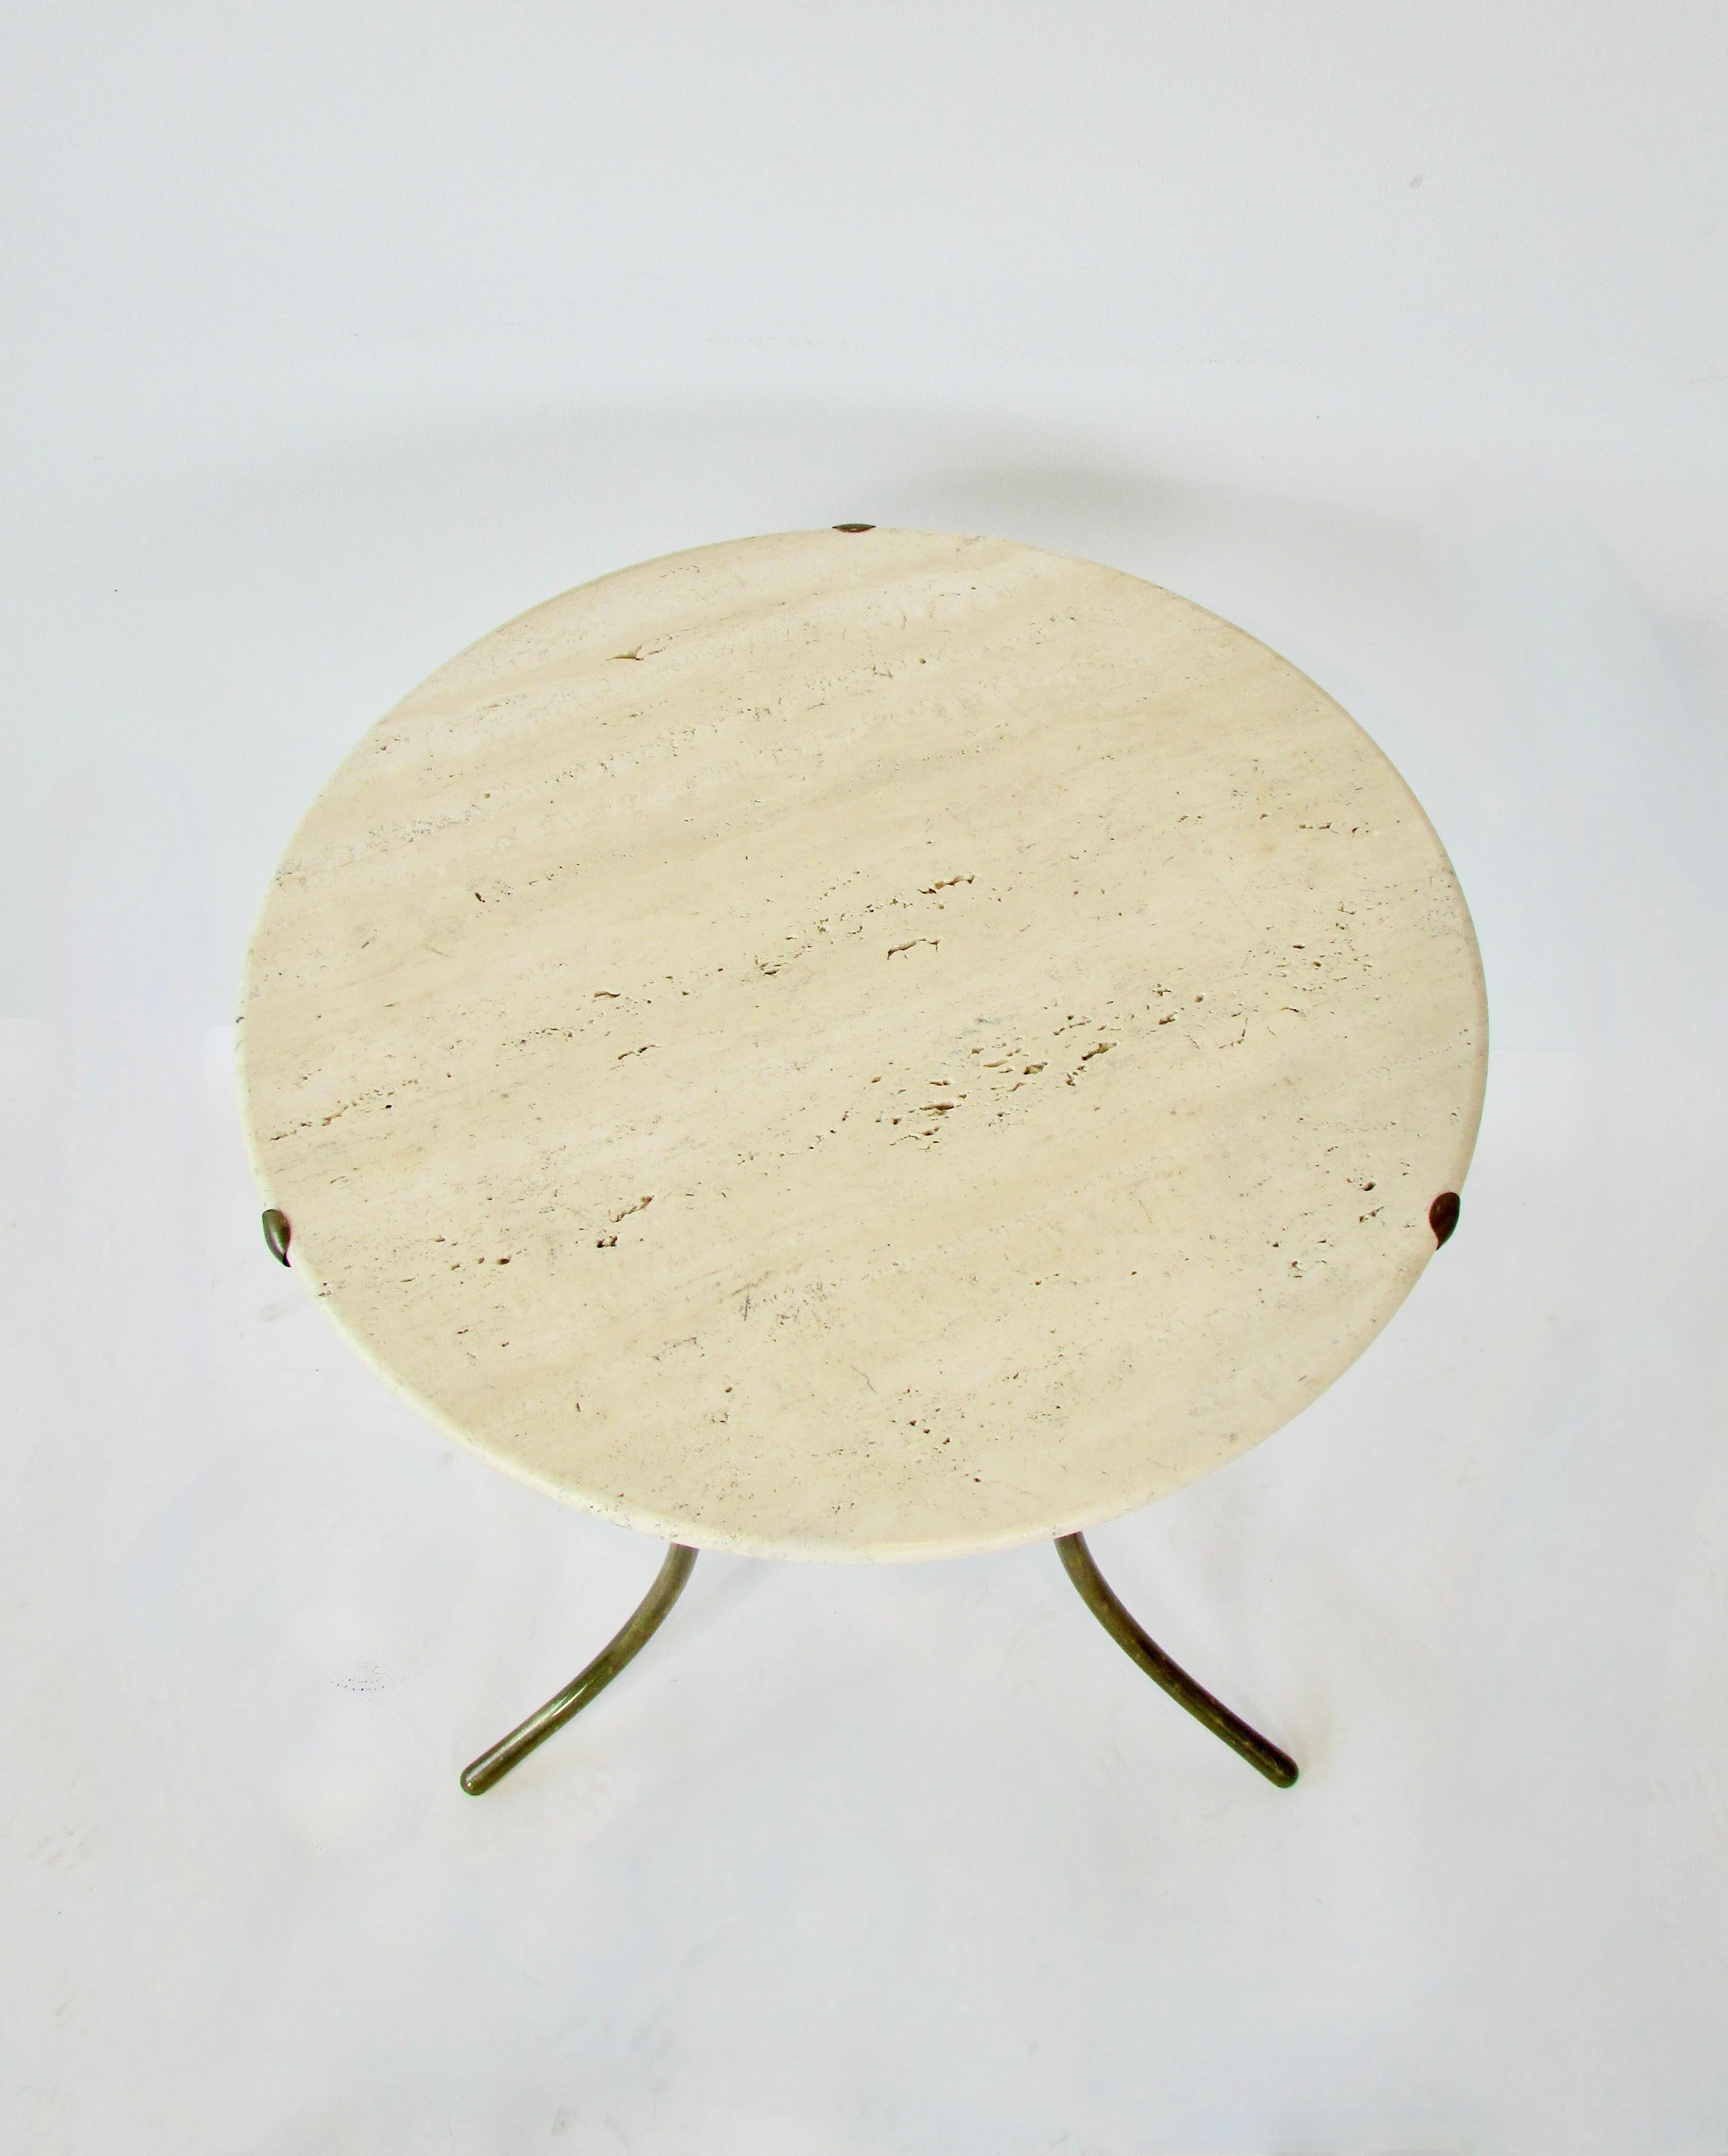 Polished Cedric Hartman Travertine Top AE Side Table on Brass Base   For Sale